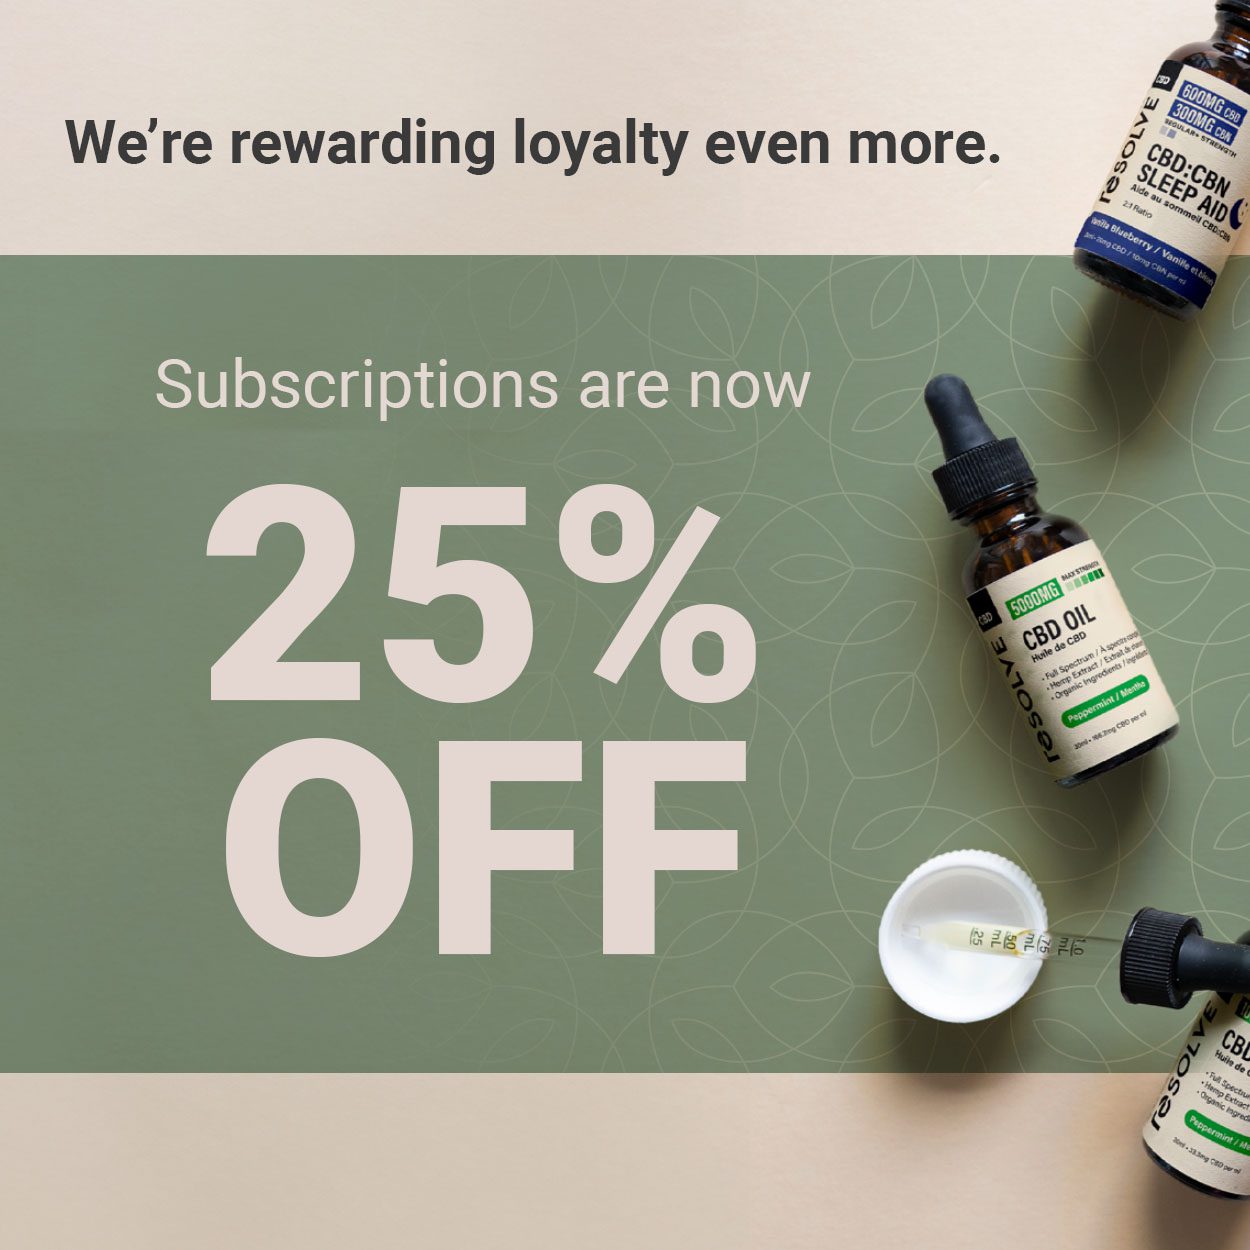 Subscriptions are now 25% off Banner